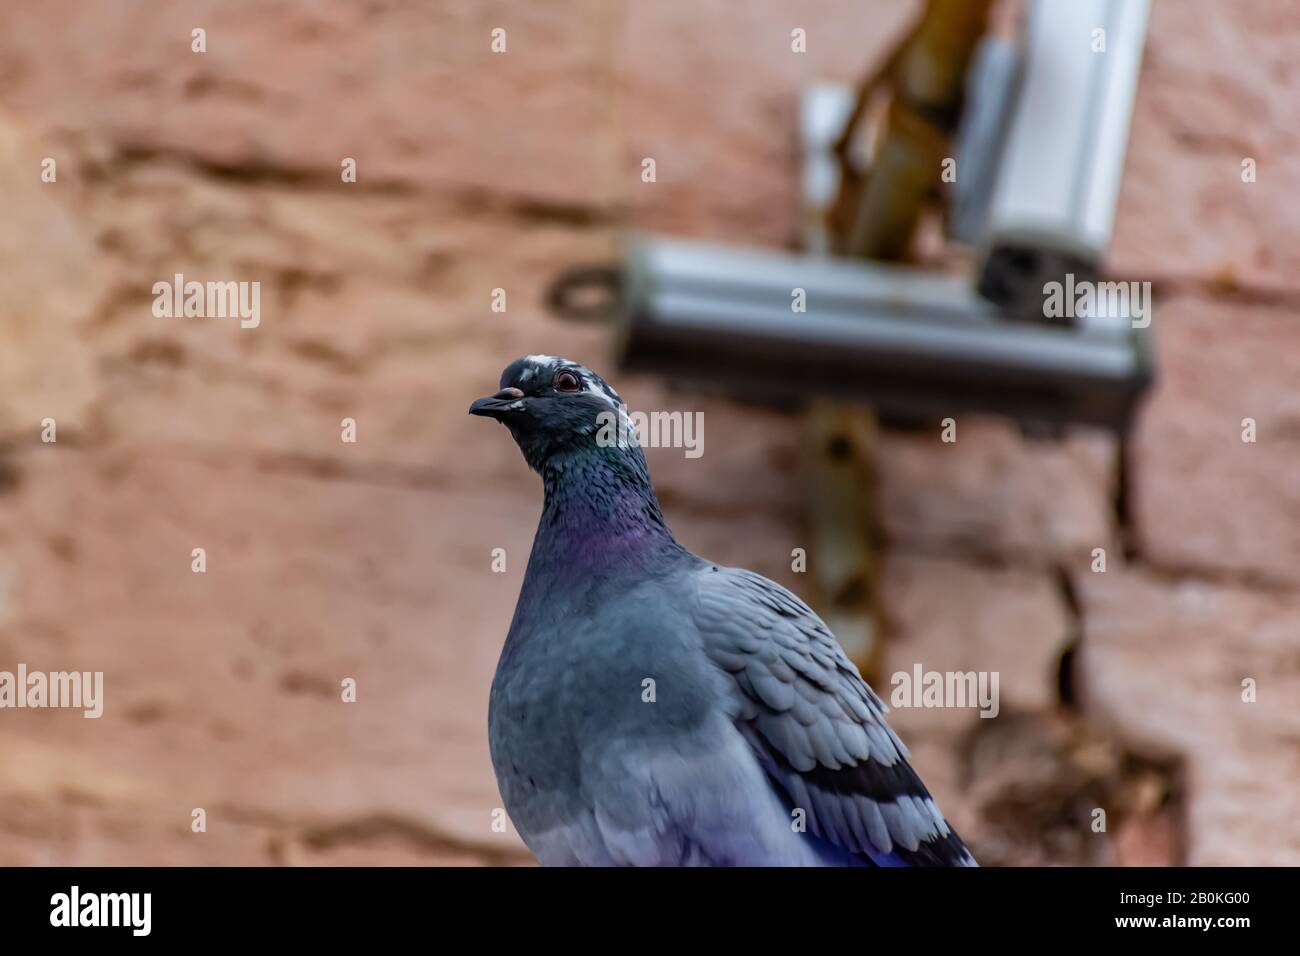 An urban pigeon perching on a roof looking funny and curiously at camera with its head cocked as if glaring or having a question Stock Photo